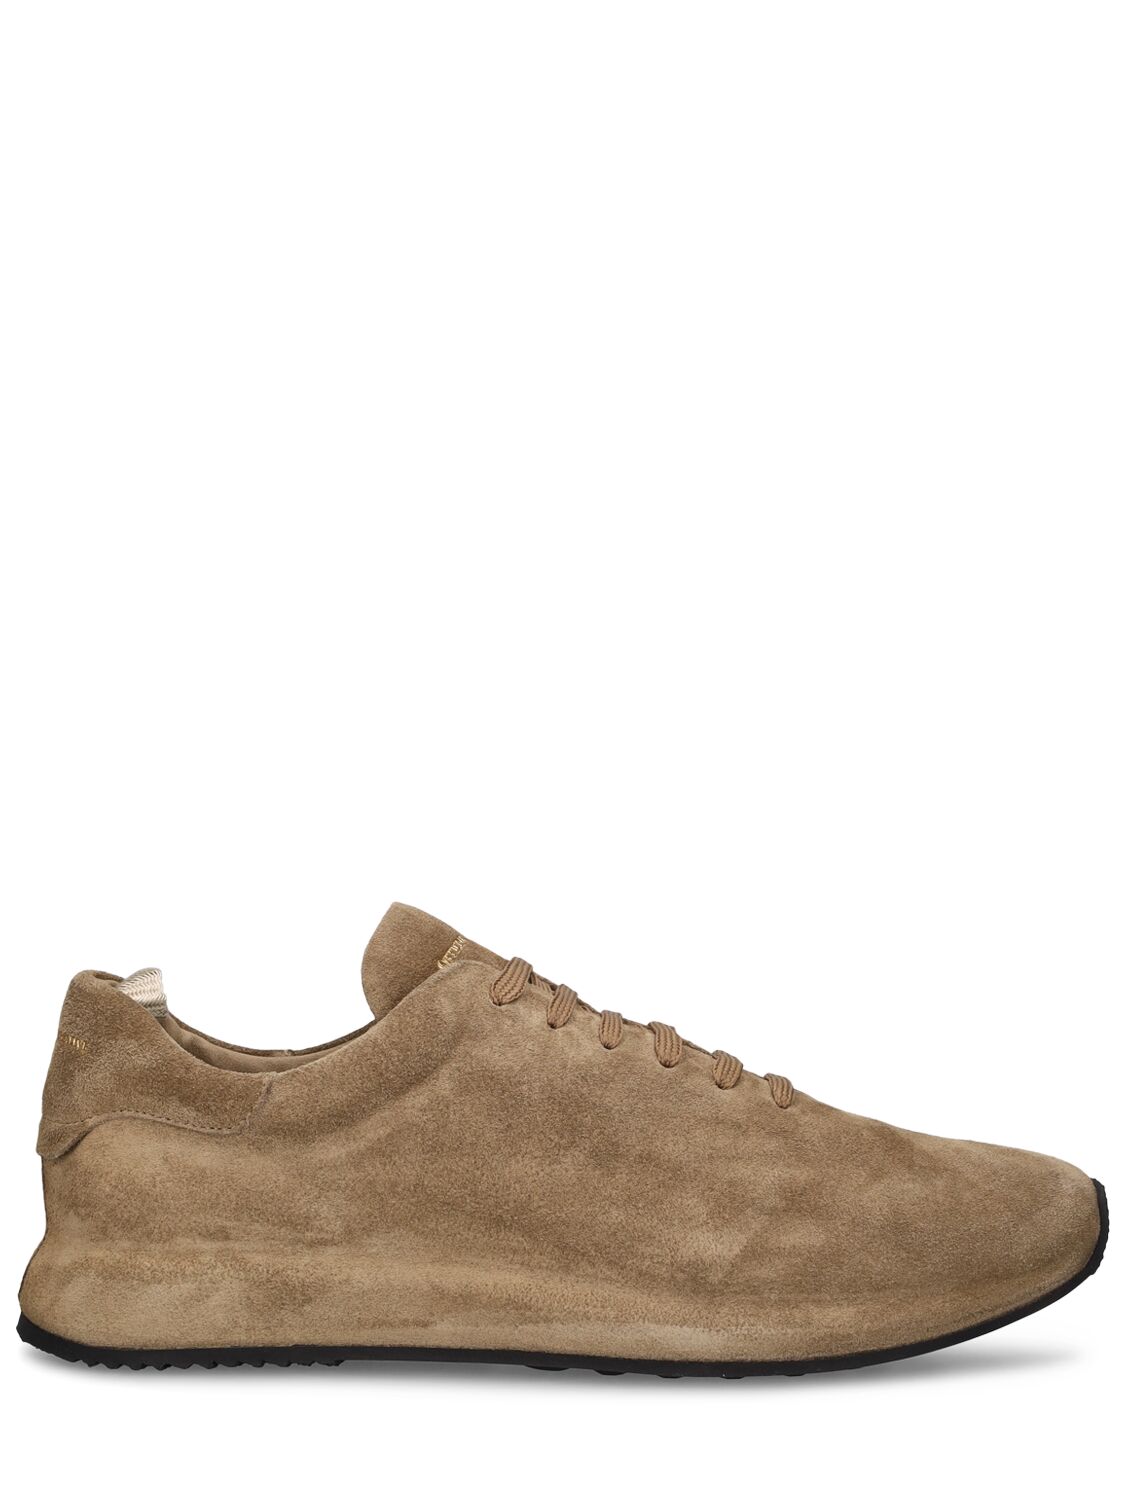 Race Low Top Leather Sneakers